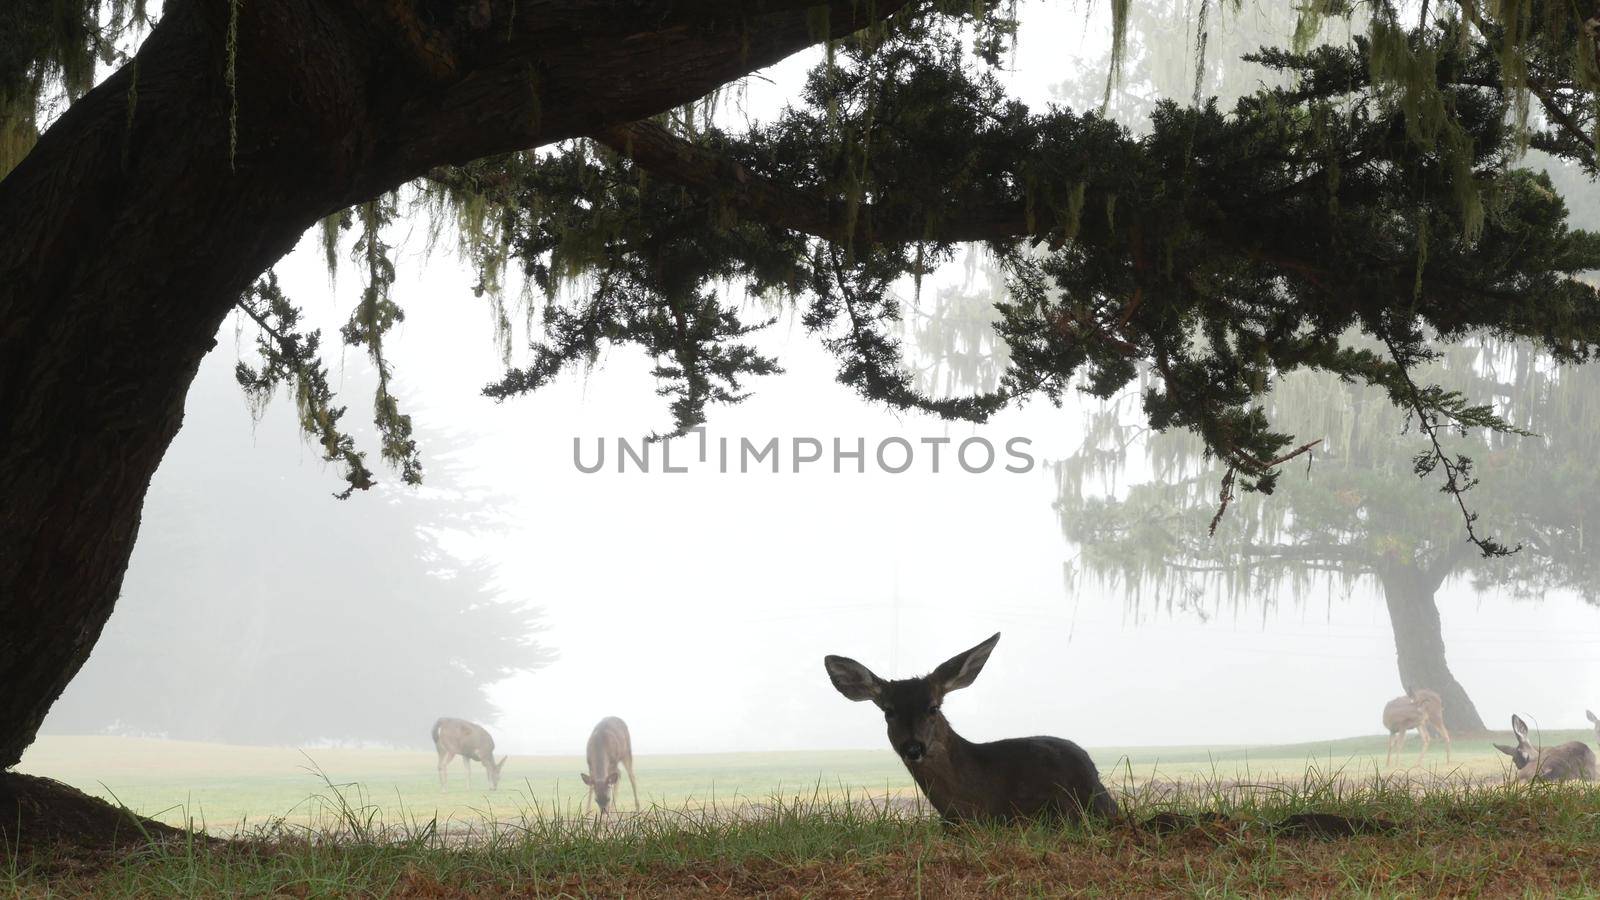 Wild young fawn deer, family grazing, cypress tree in foggy forest. California. by DogoraSun